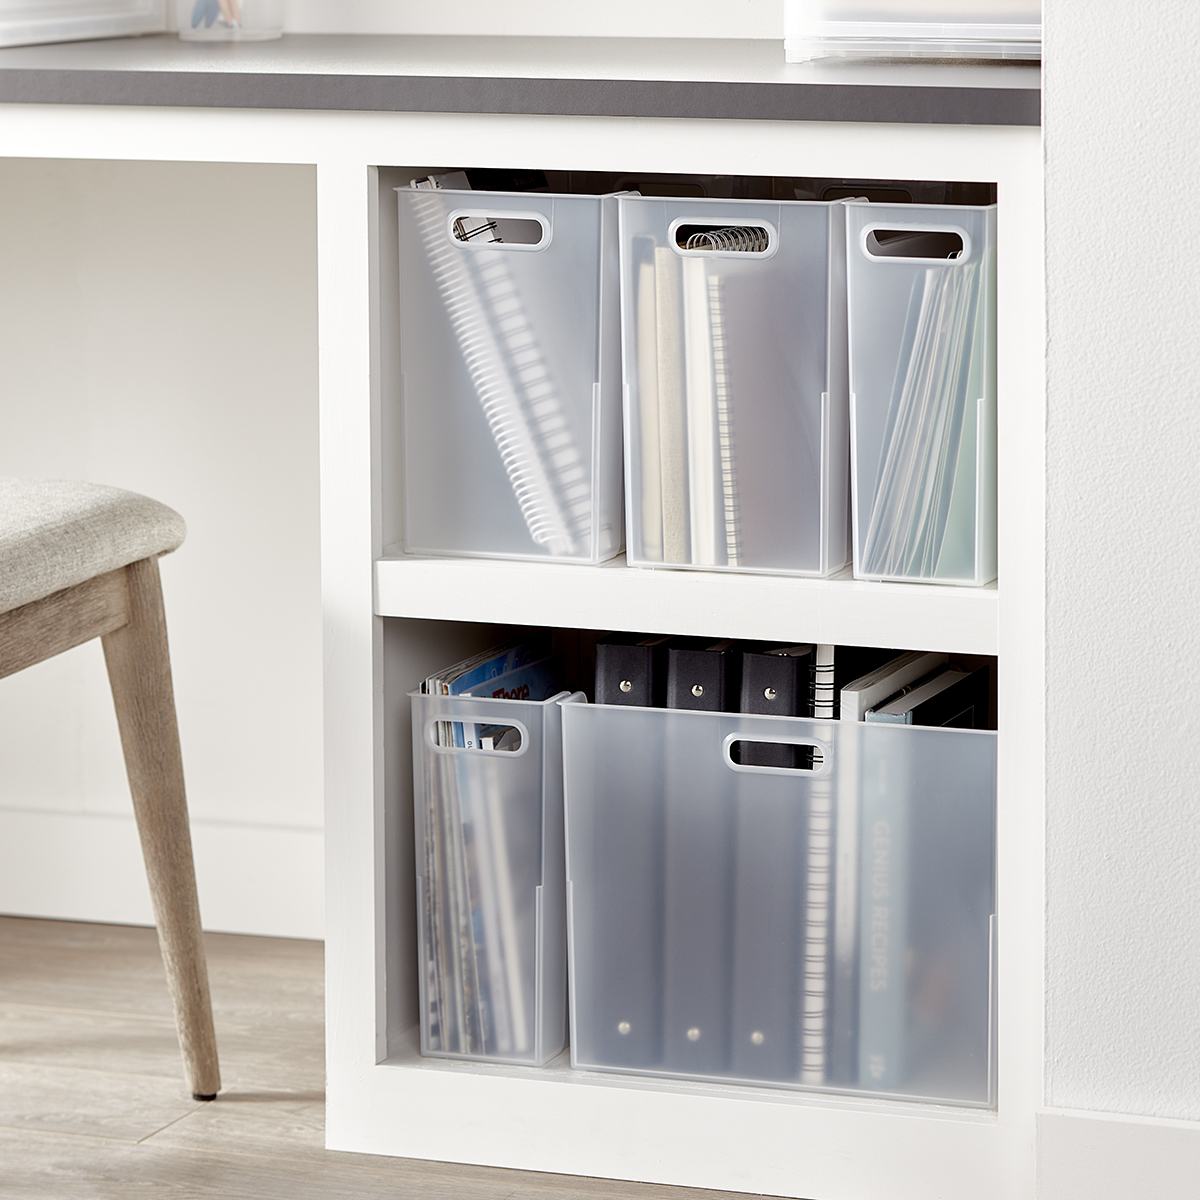 https://www.containerstore.com/catalogimages/434740/10080905g_Shimo_tall_bins.jpg